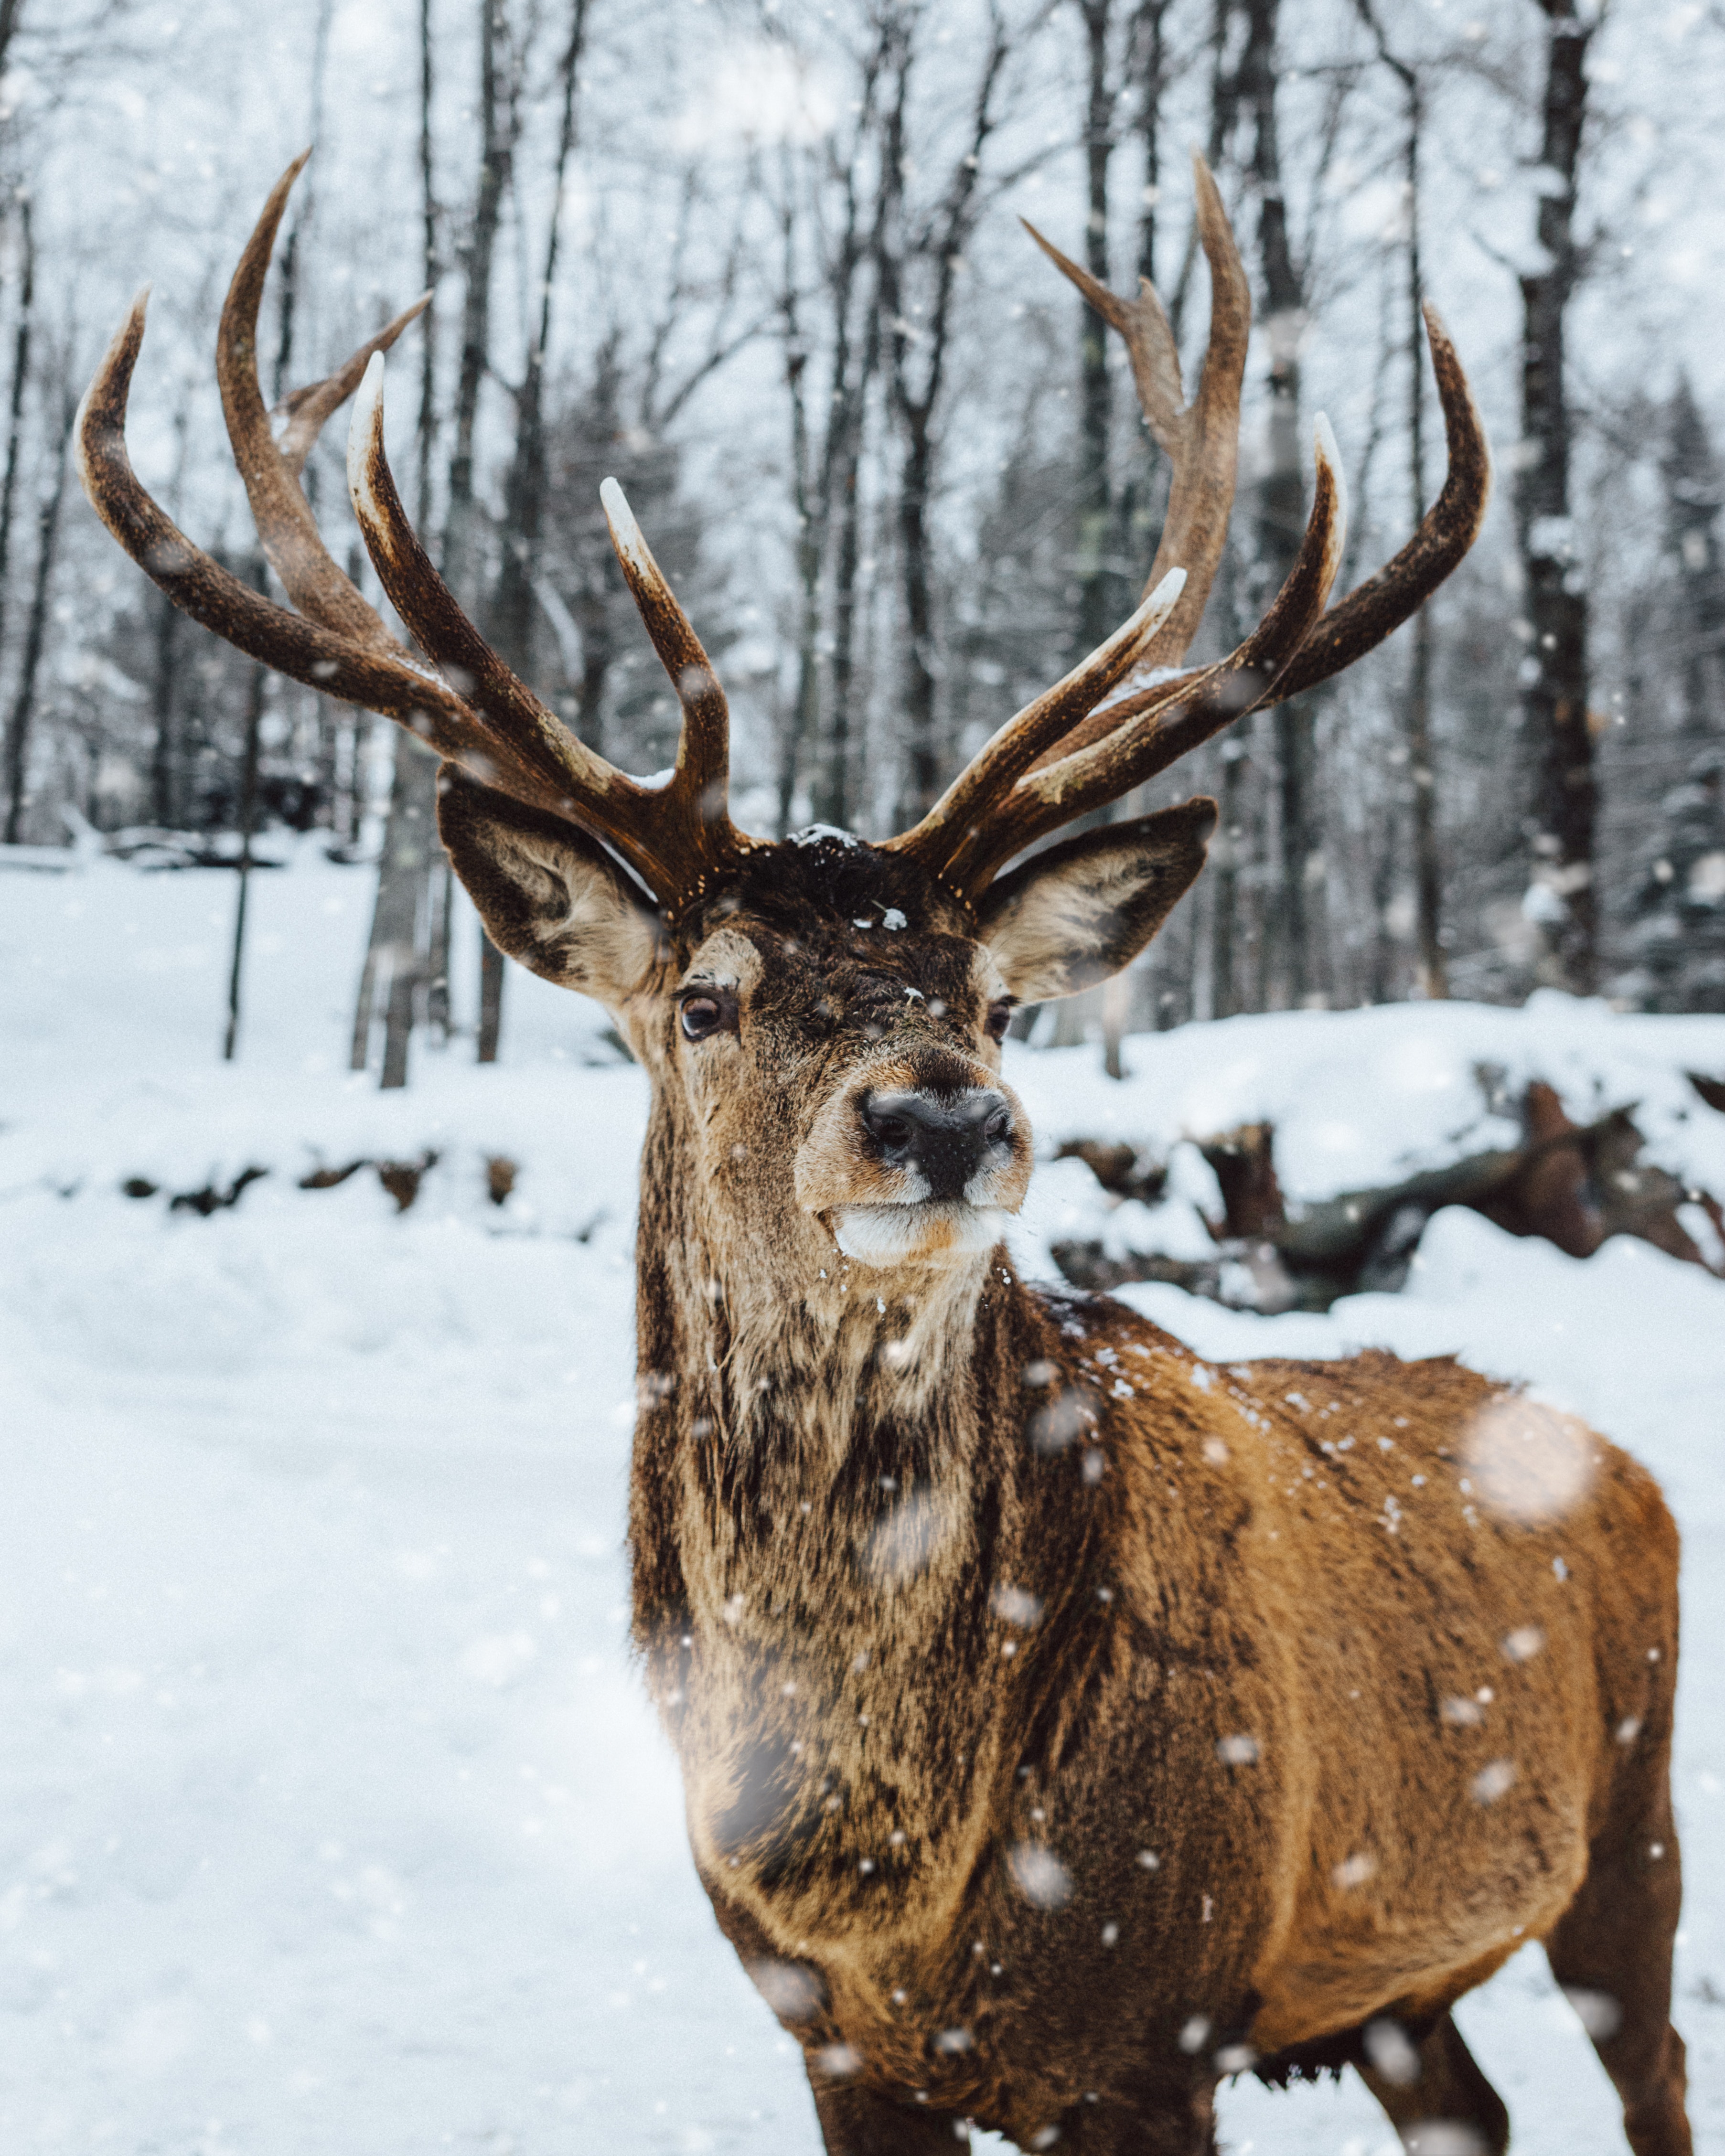 Photo of a deer exploring the winter forrest